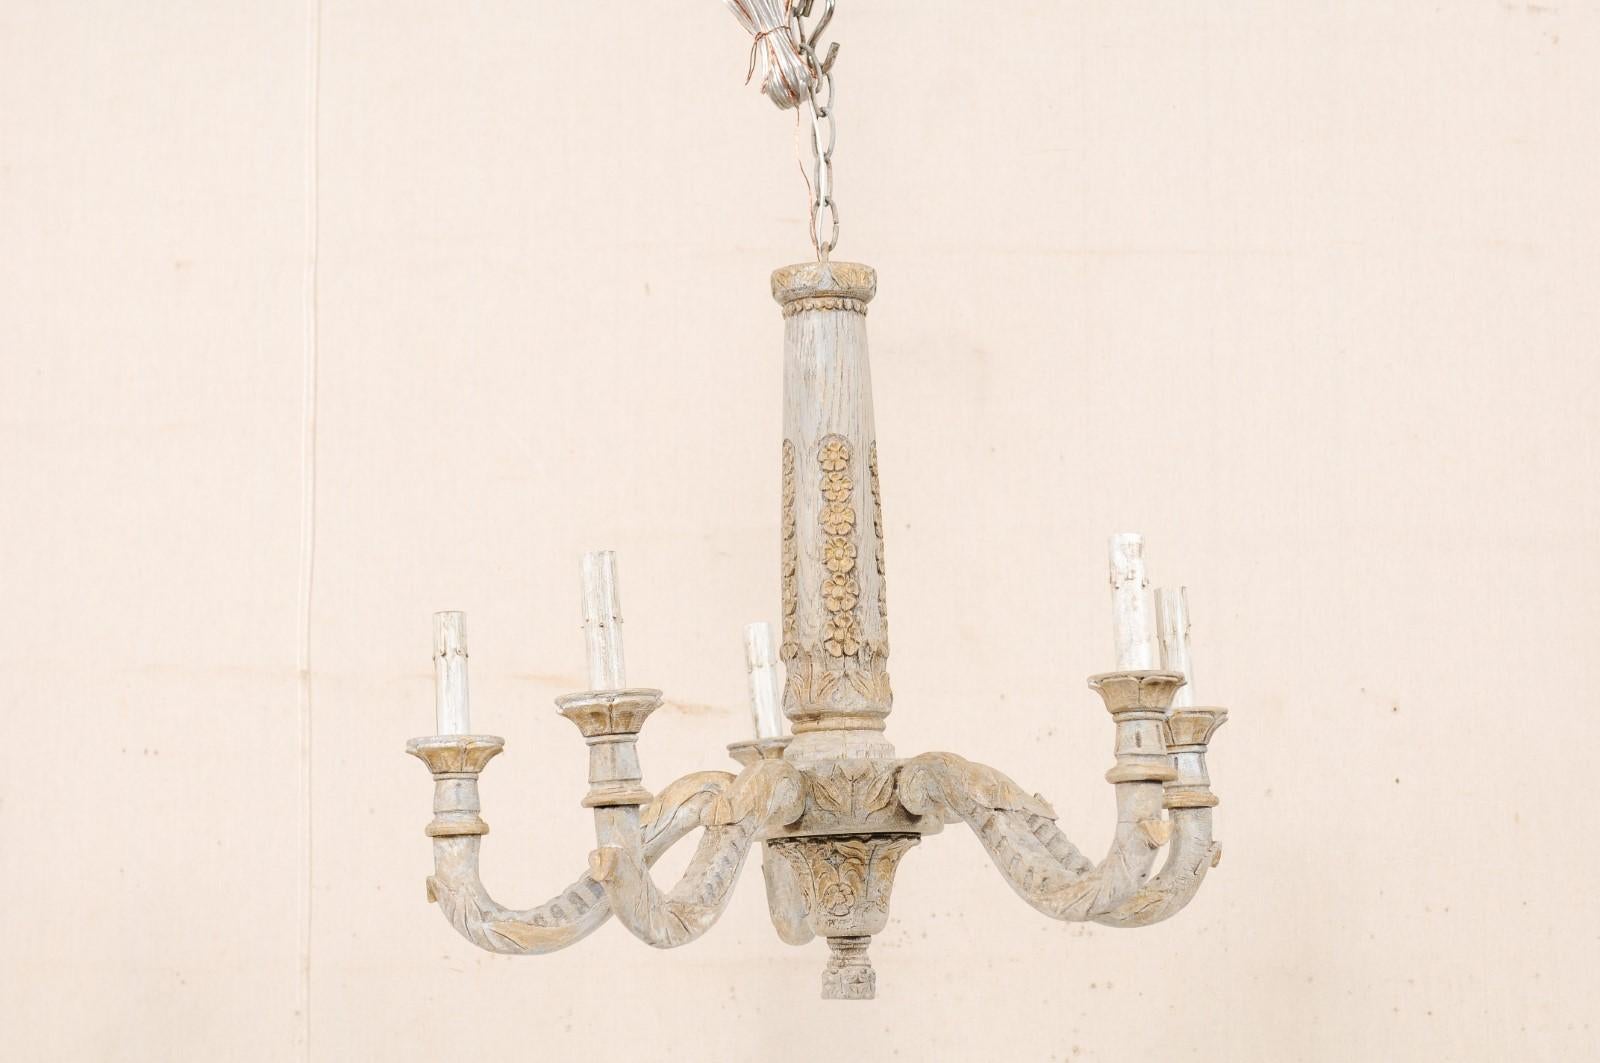 20th Century French Painted and Carved Wood Chandelier with Floral Carved Column